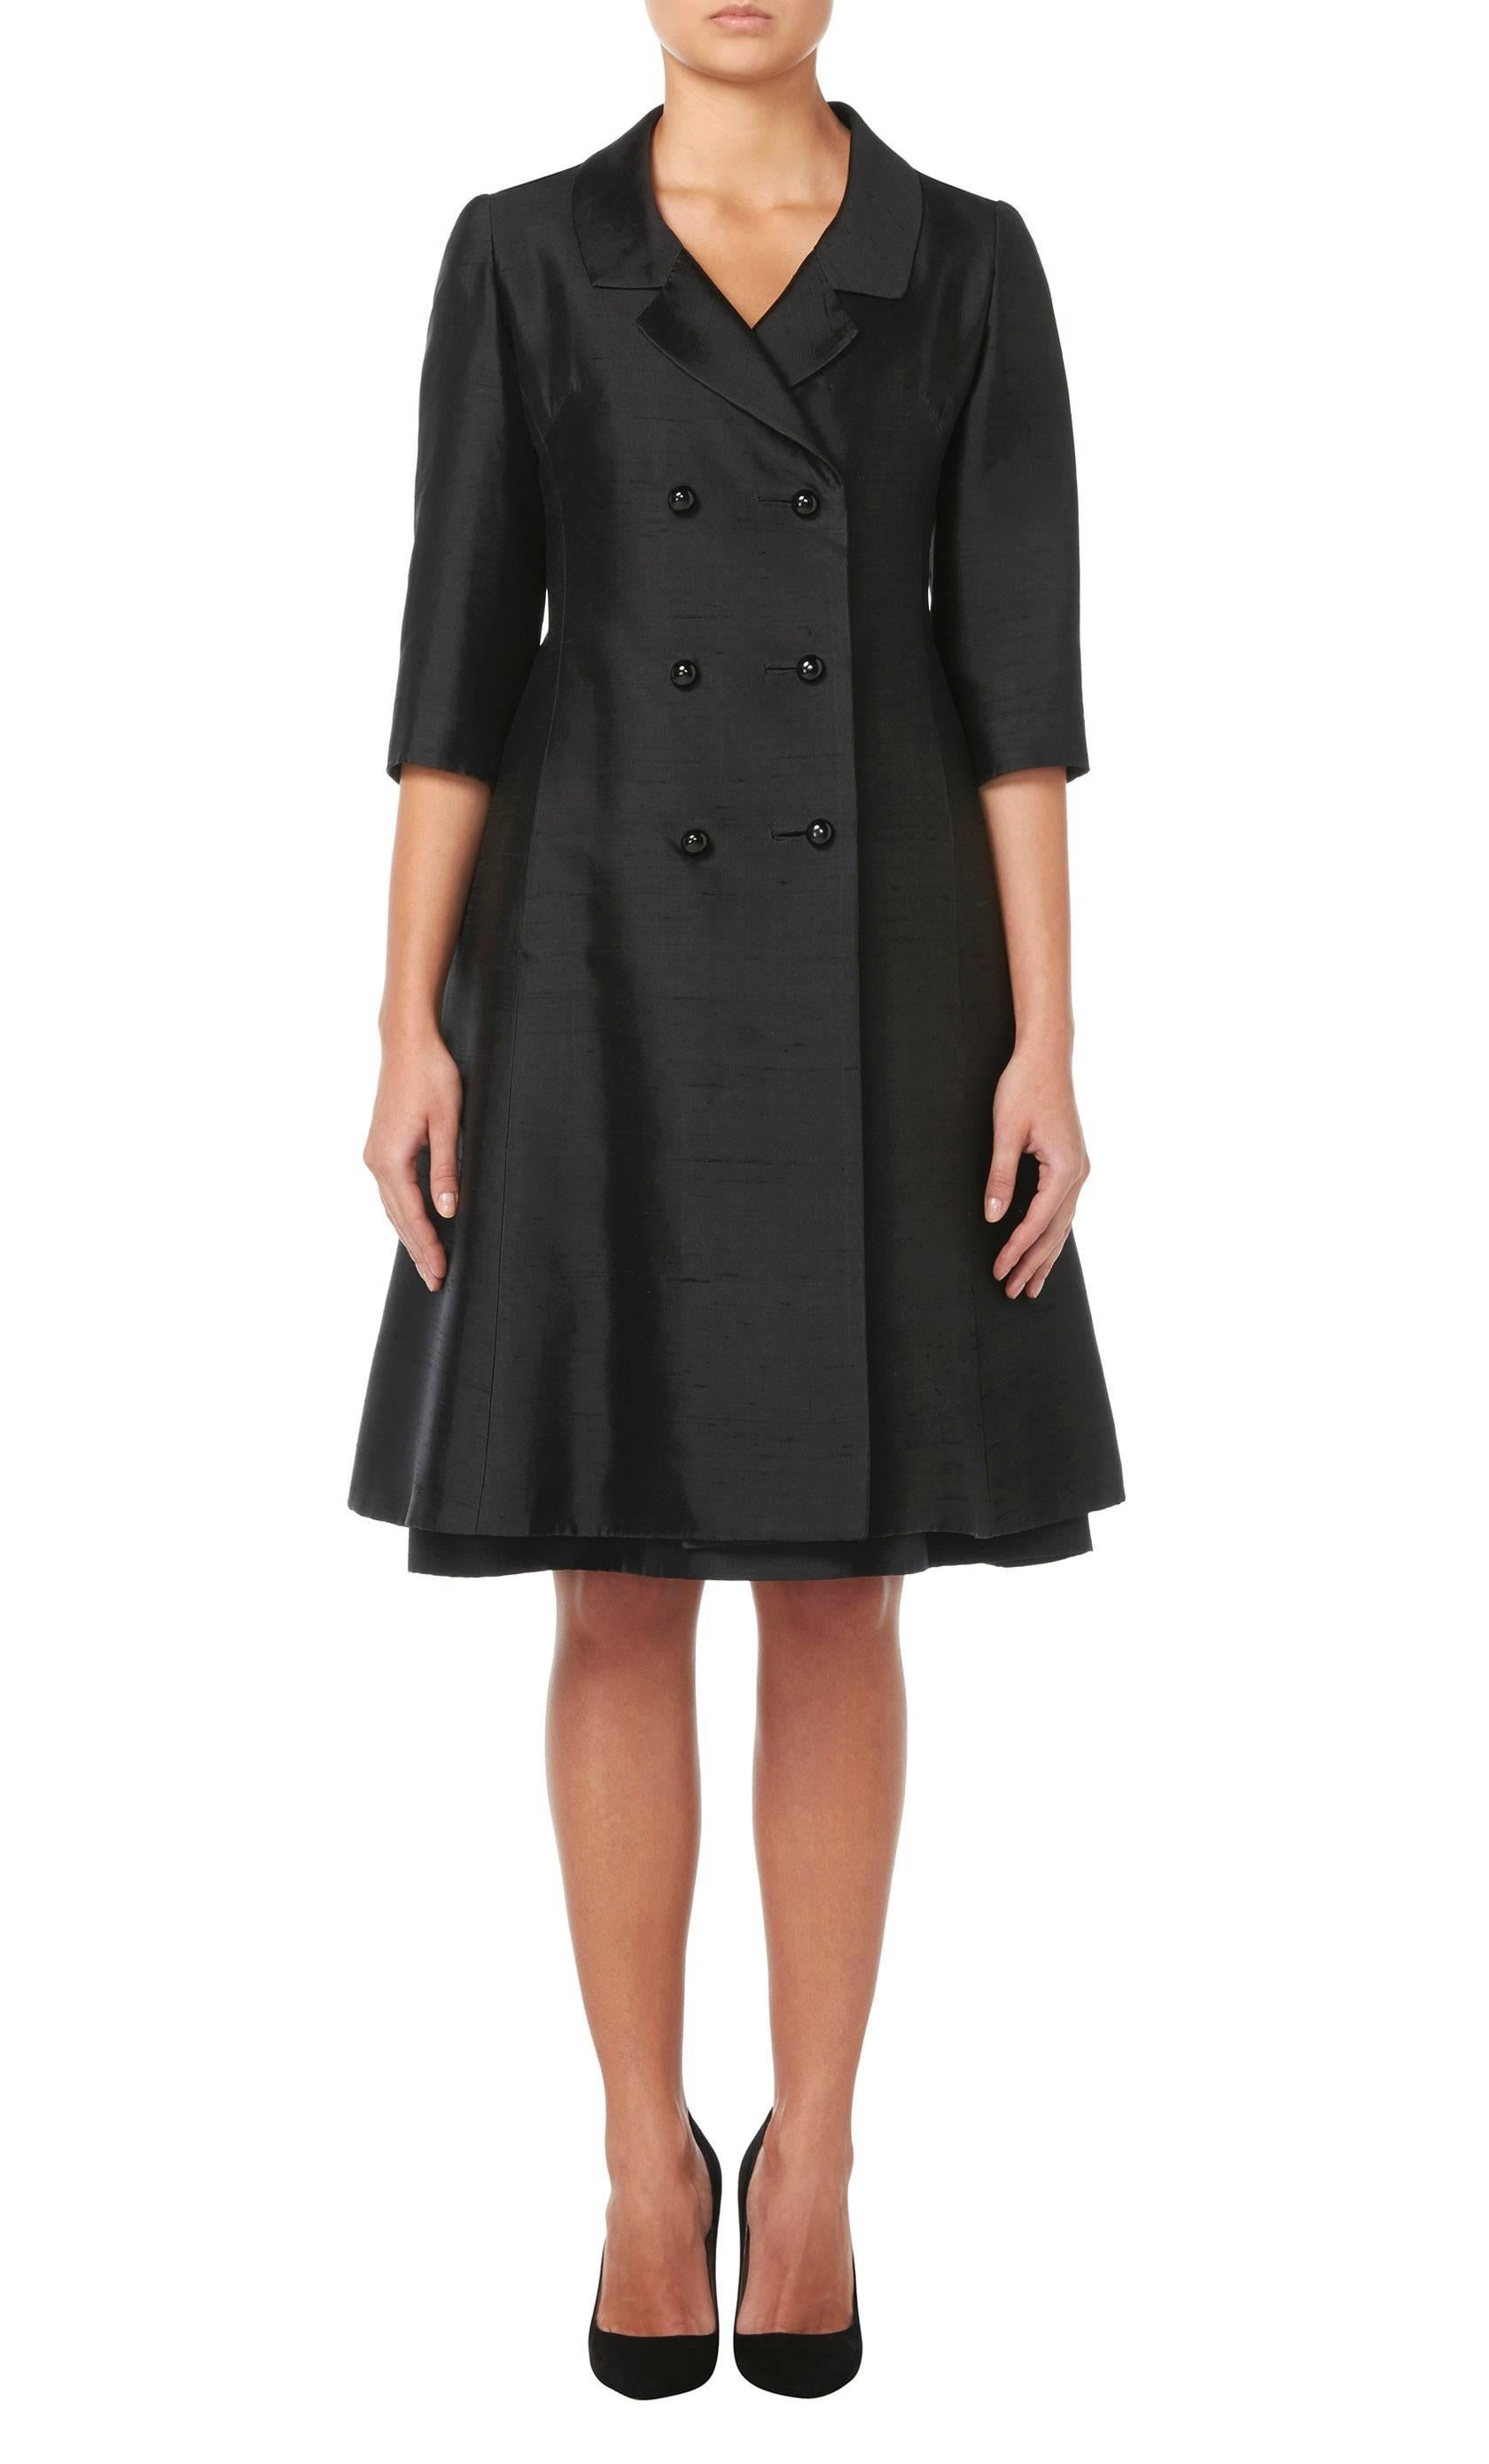 This incredibly chic Nina Ricci dress suit is constructed in black silk and is made up of a cocktail dress and double-breasted swing coat. The dress is tight fitting over the body, flaring into a full skirt and features bows at the shoulder for a